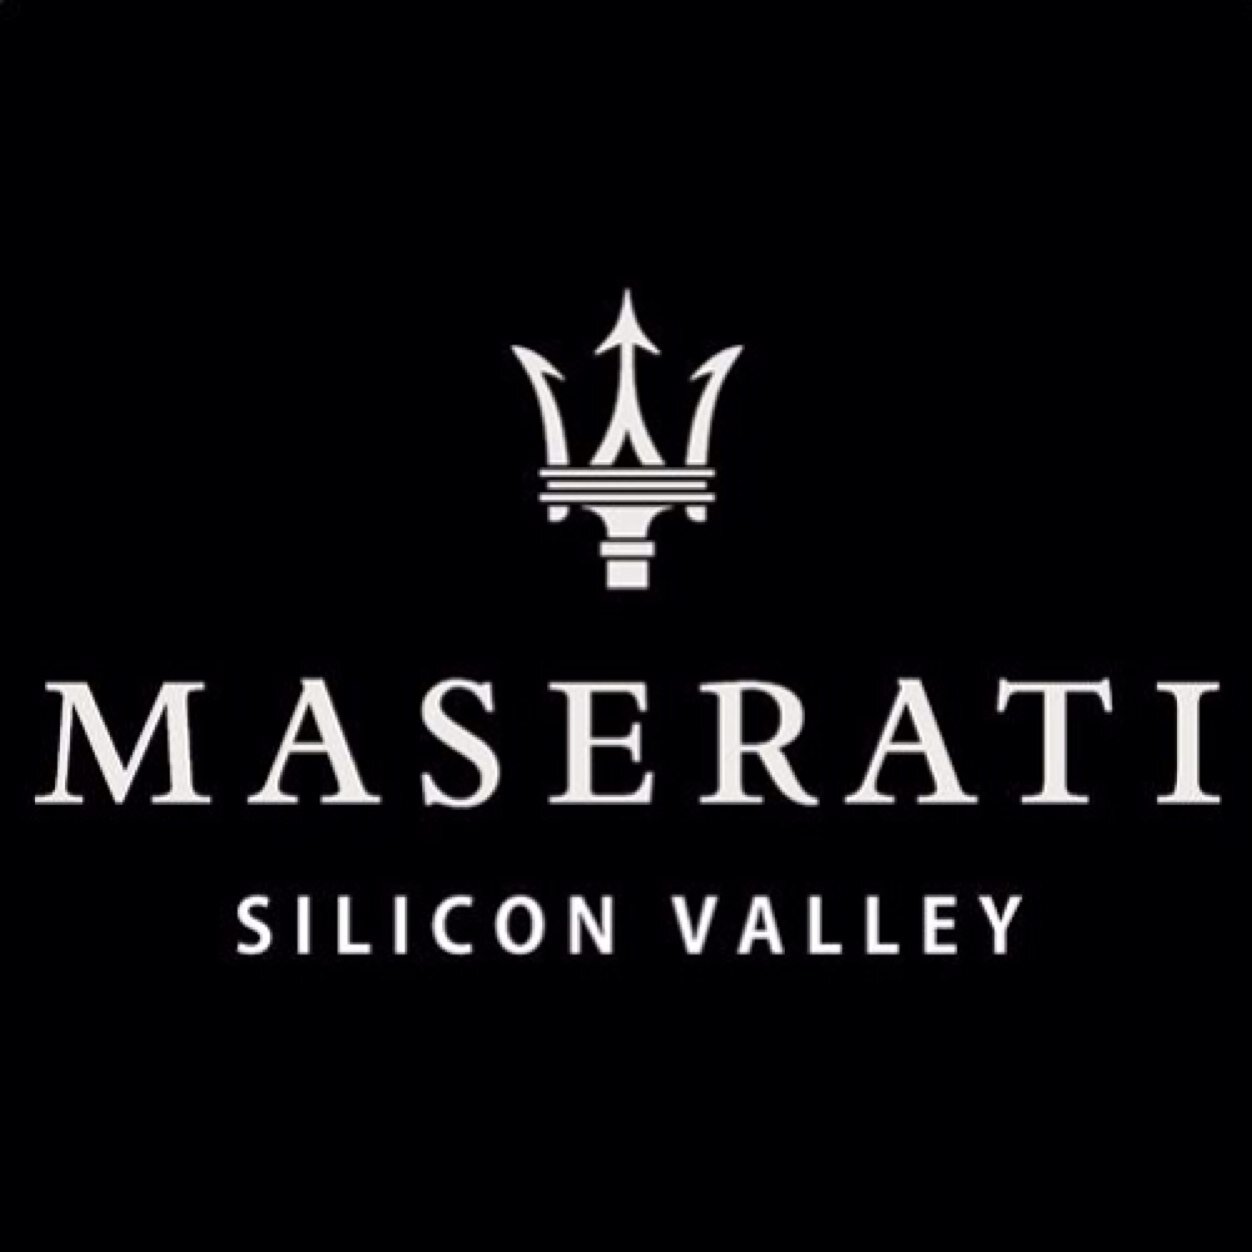 Official Maserati dealer, serving Silicon Valley and the greater San Francisco Bay Area since 2005. Experience the Passion, we strike!